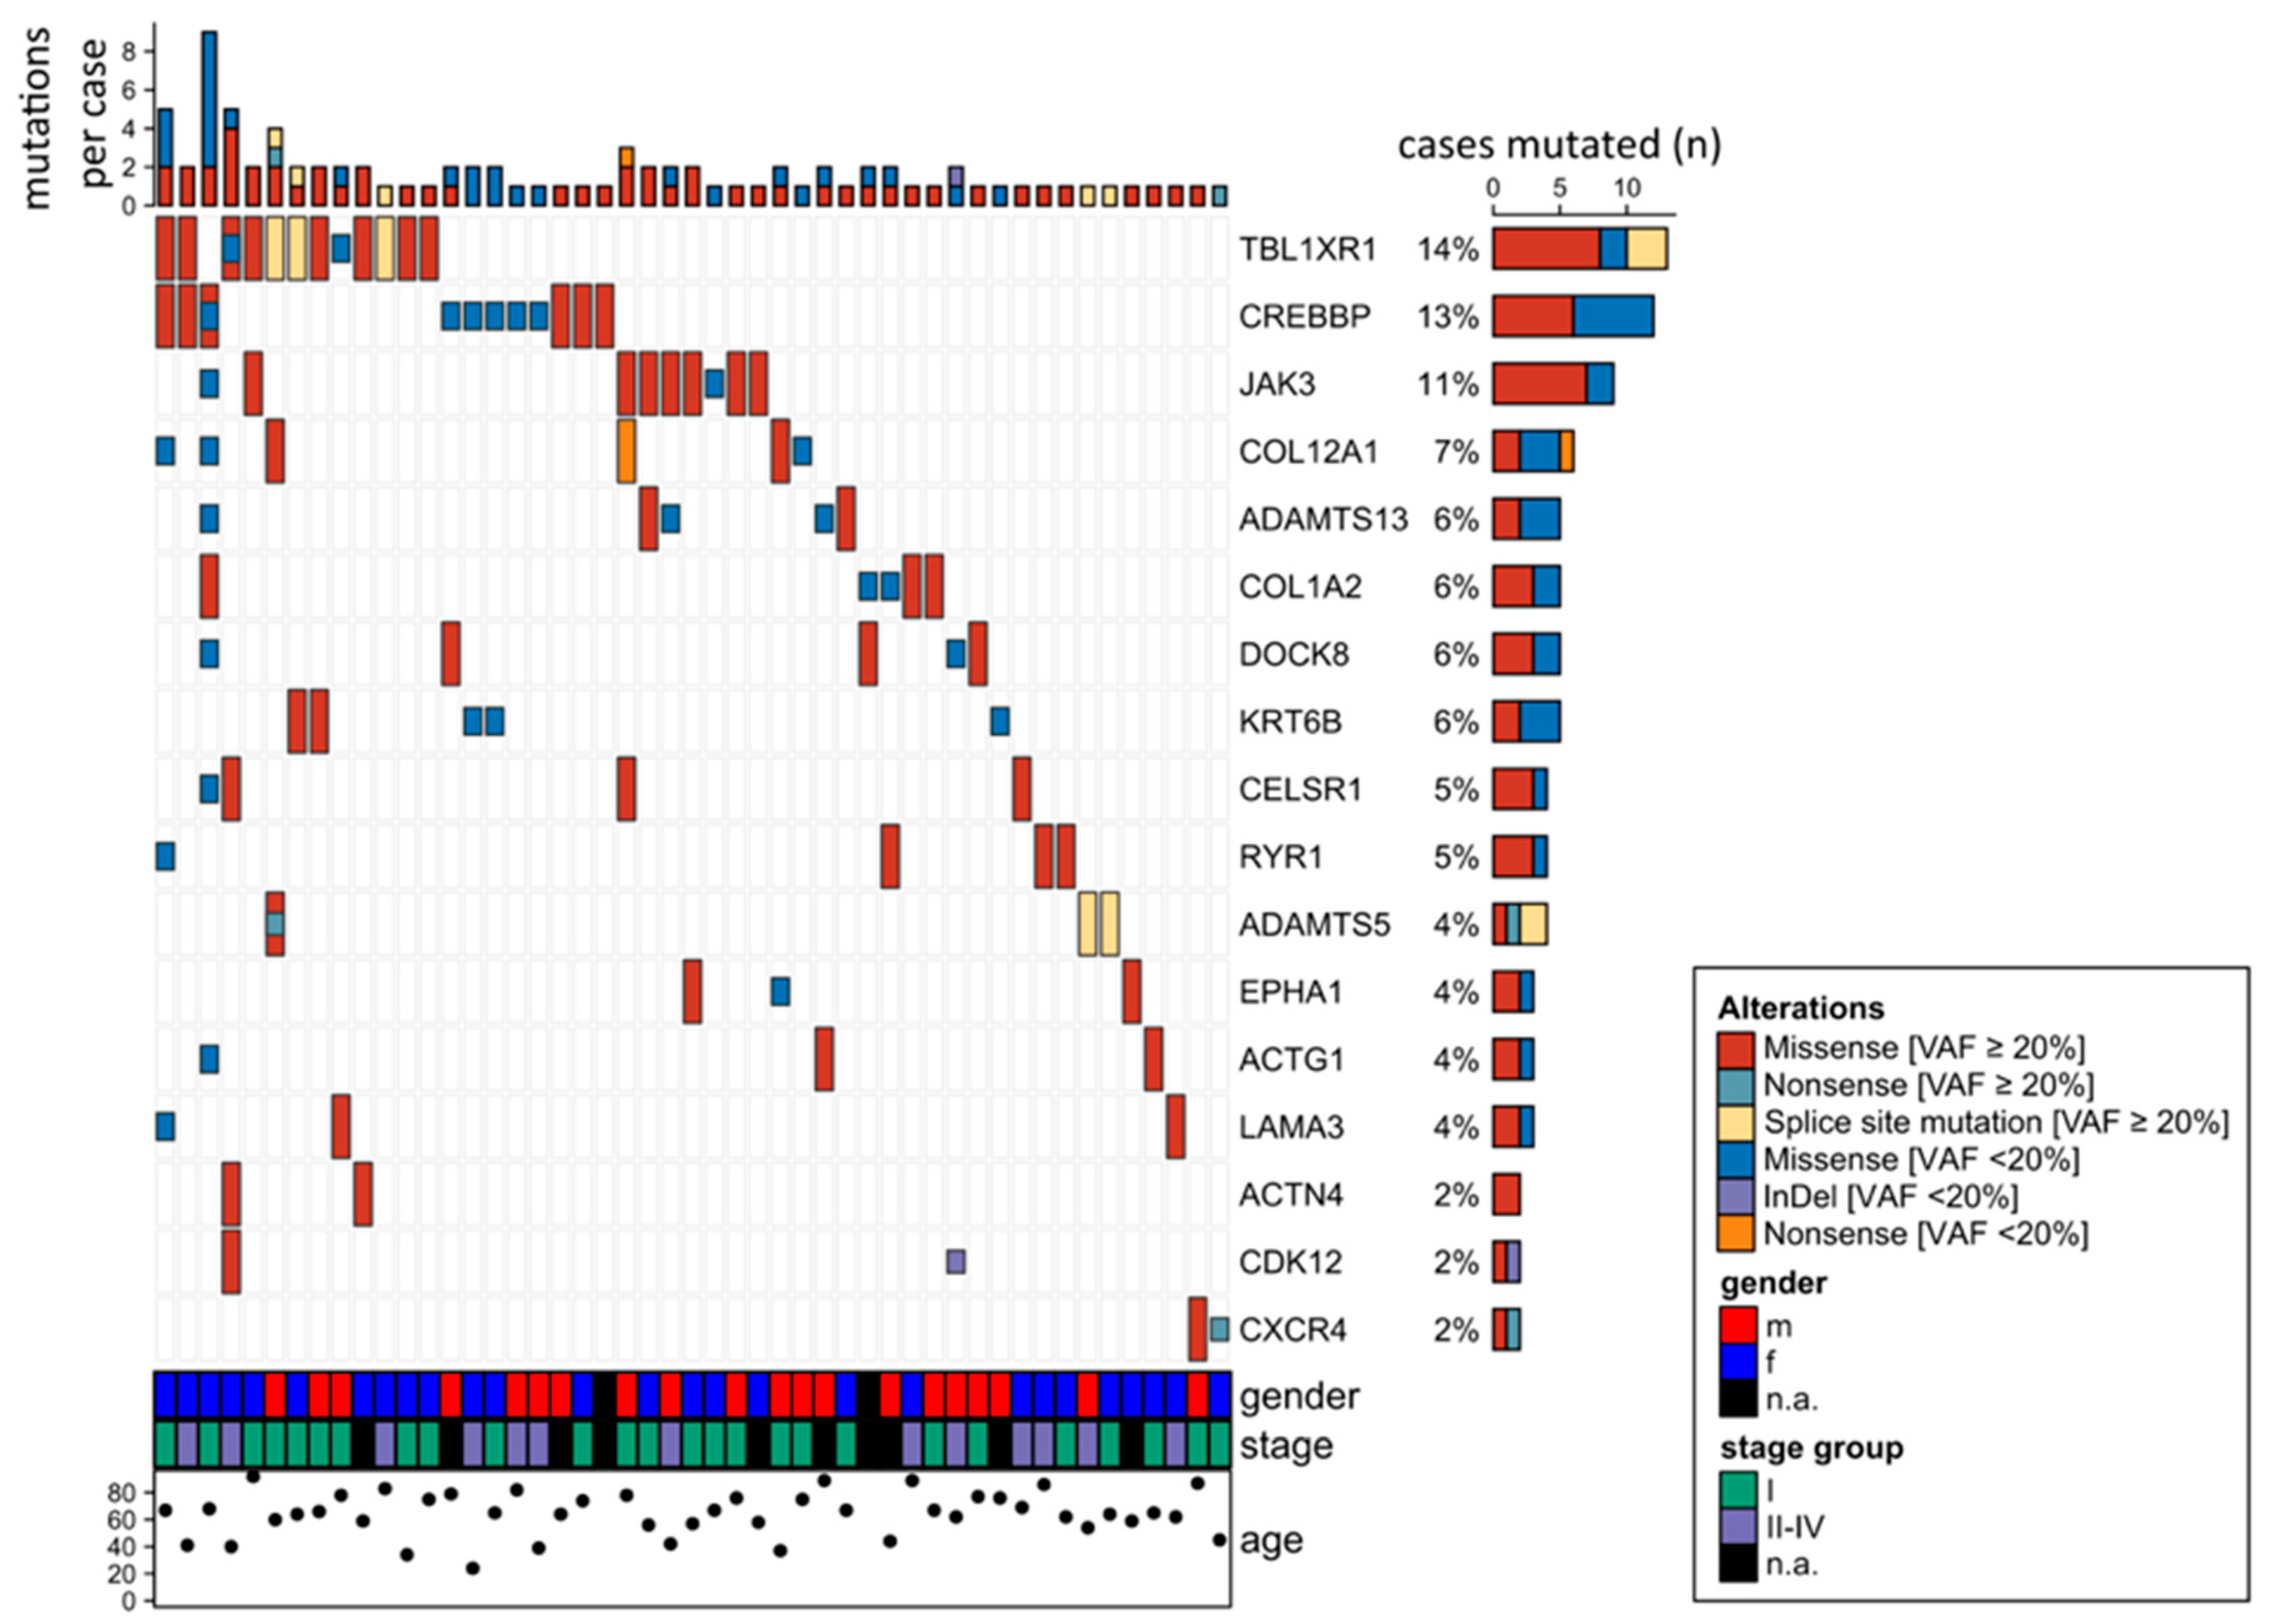 Cancers | Free Full-Text | Identifying Genetic Lesions in Ocular Adnexal Extranodal Marginal Zone Lymphomas of the MALT Subtype by Genome, Whole Exome and Targeted Sequencing | HTML